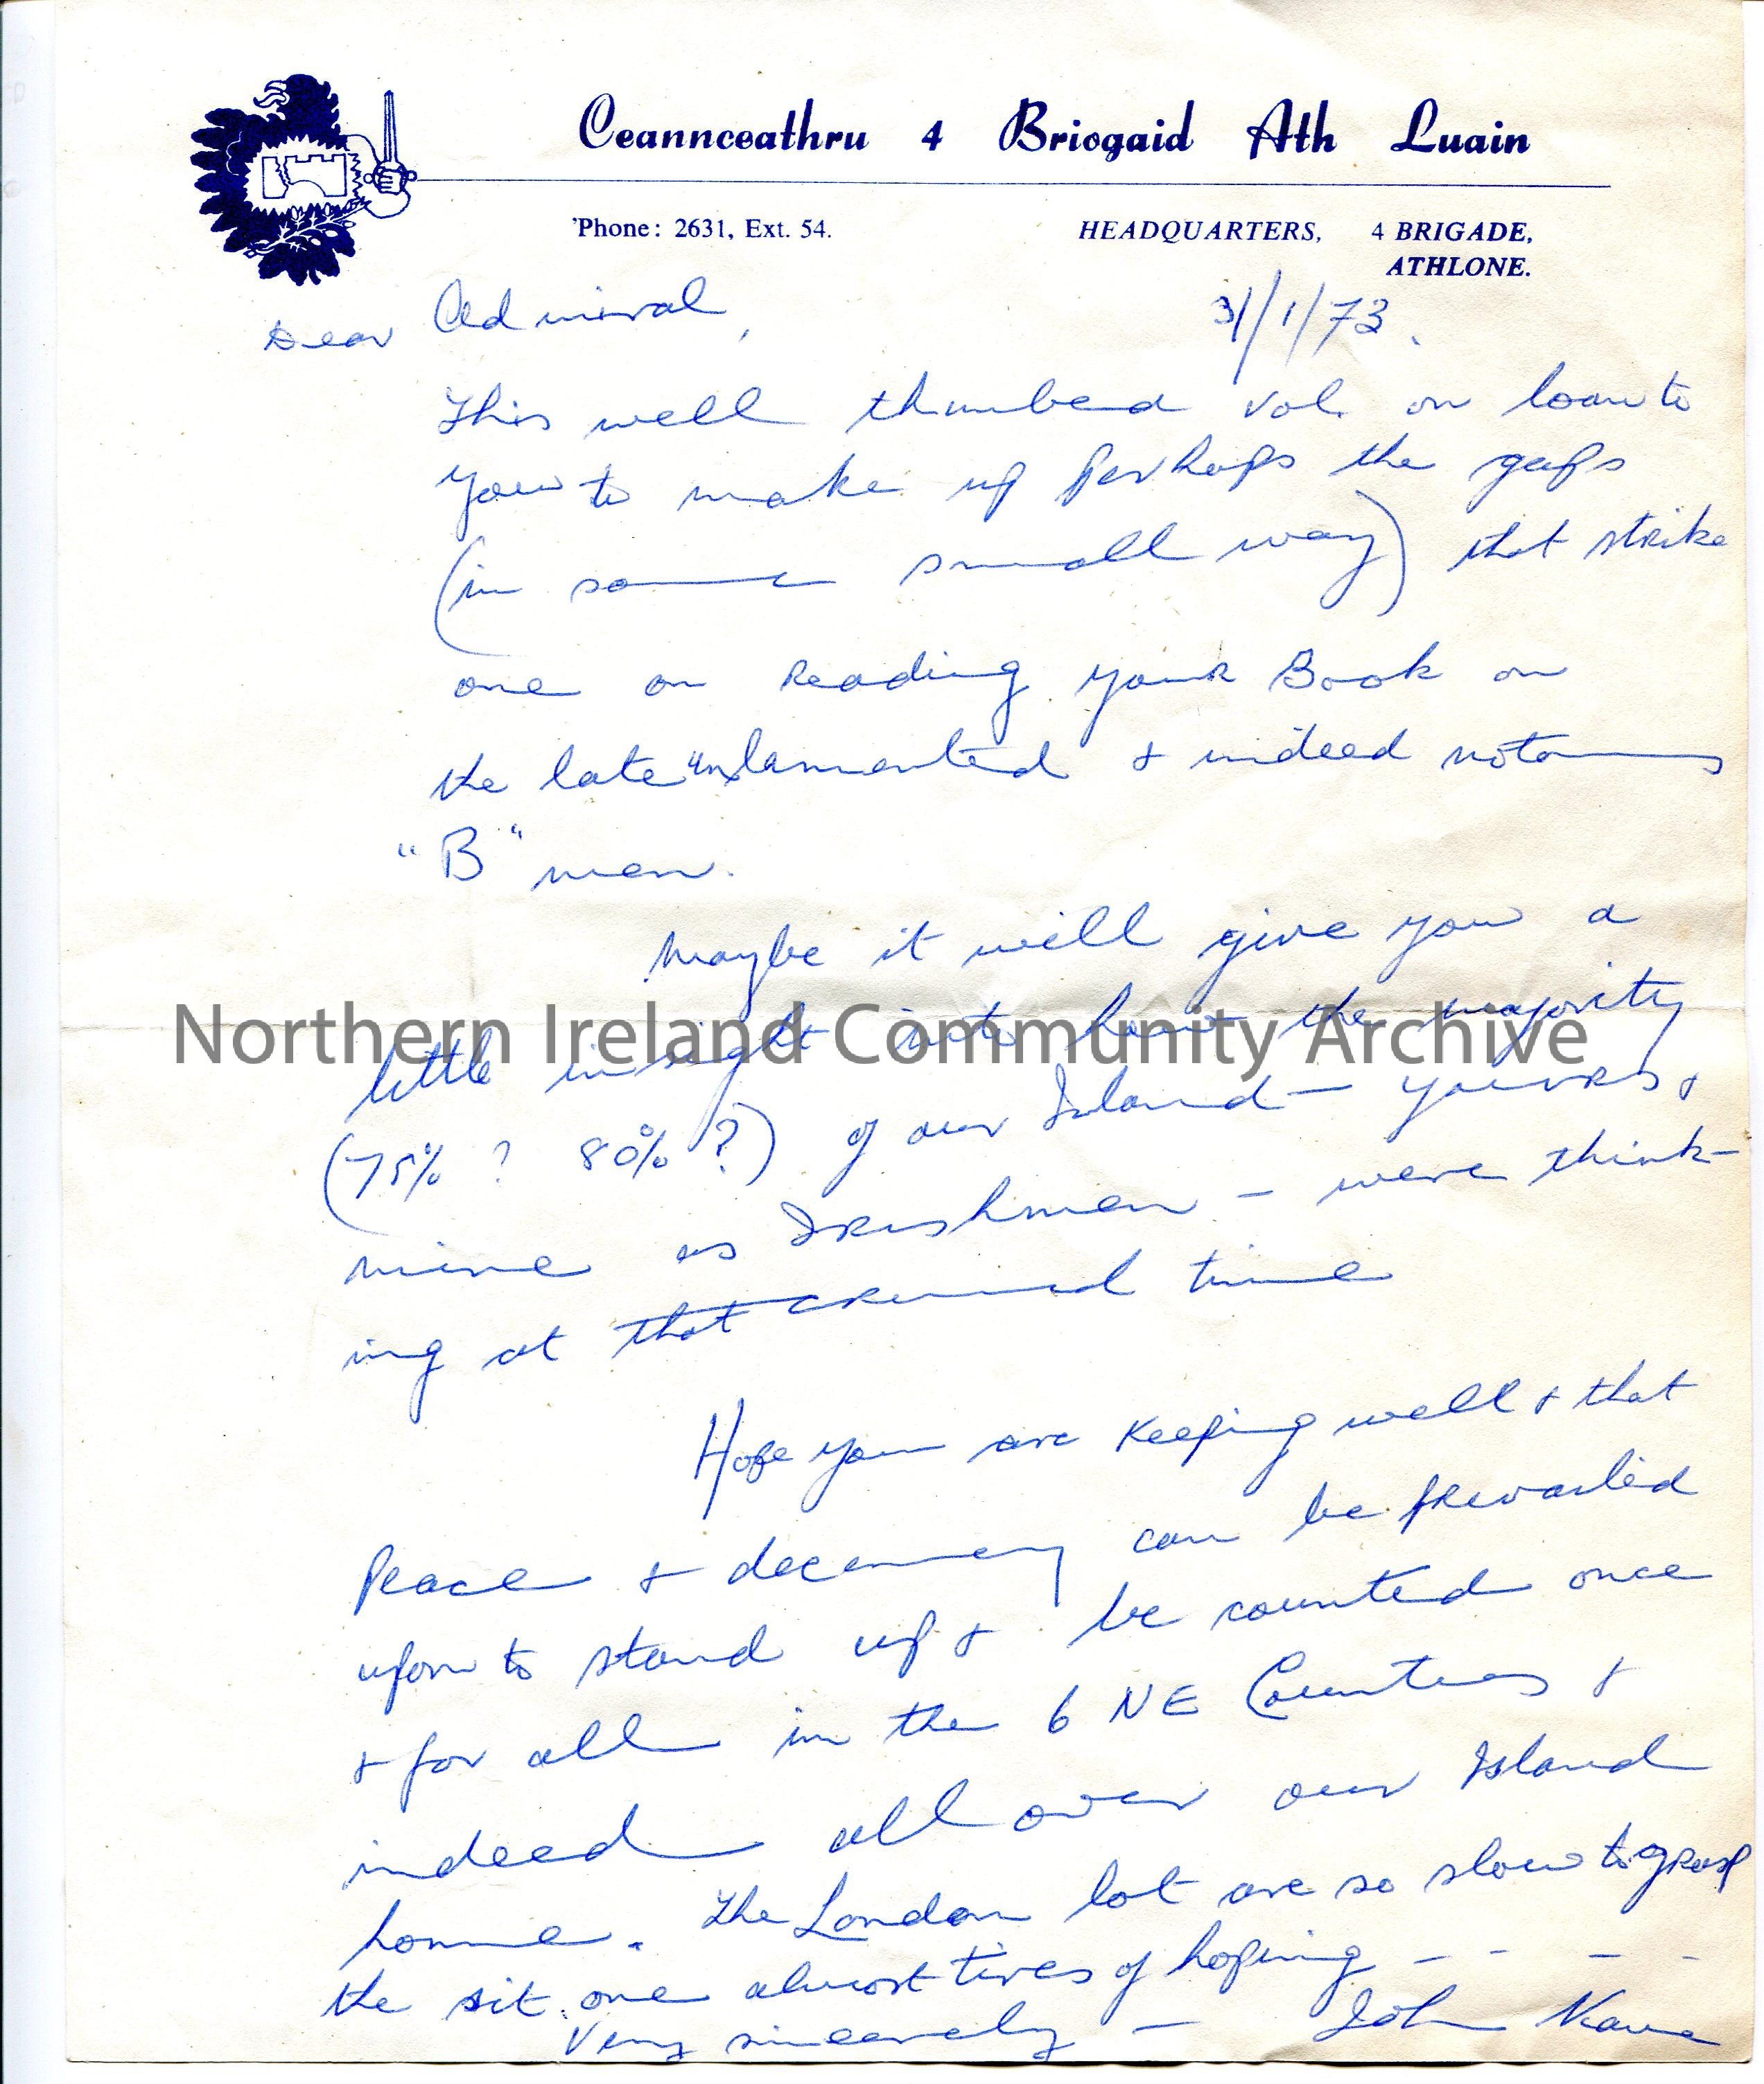 Handwritten letter on headed paper in blue Biro ink to ‘Dear Admiral’. They would like to loan the Admiral a book to give them an ‘insight’ to the tho…